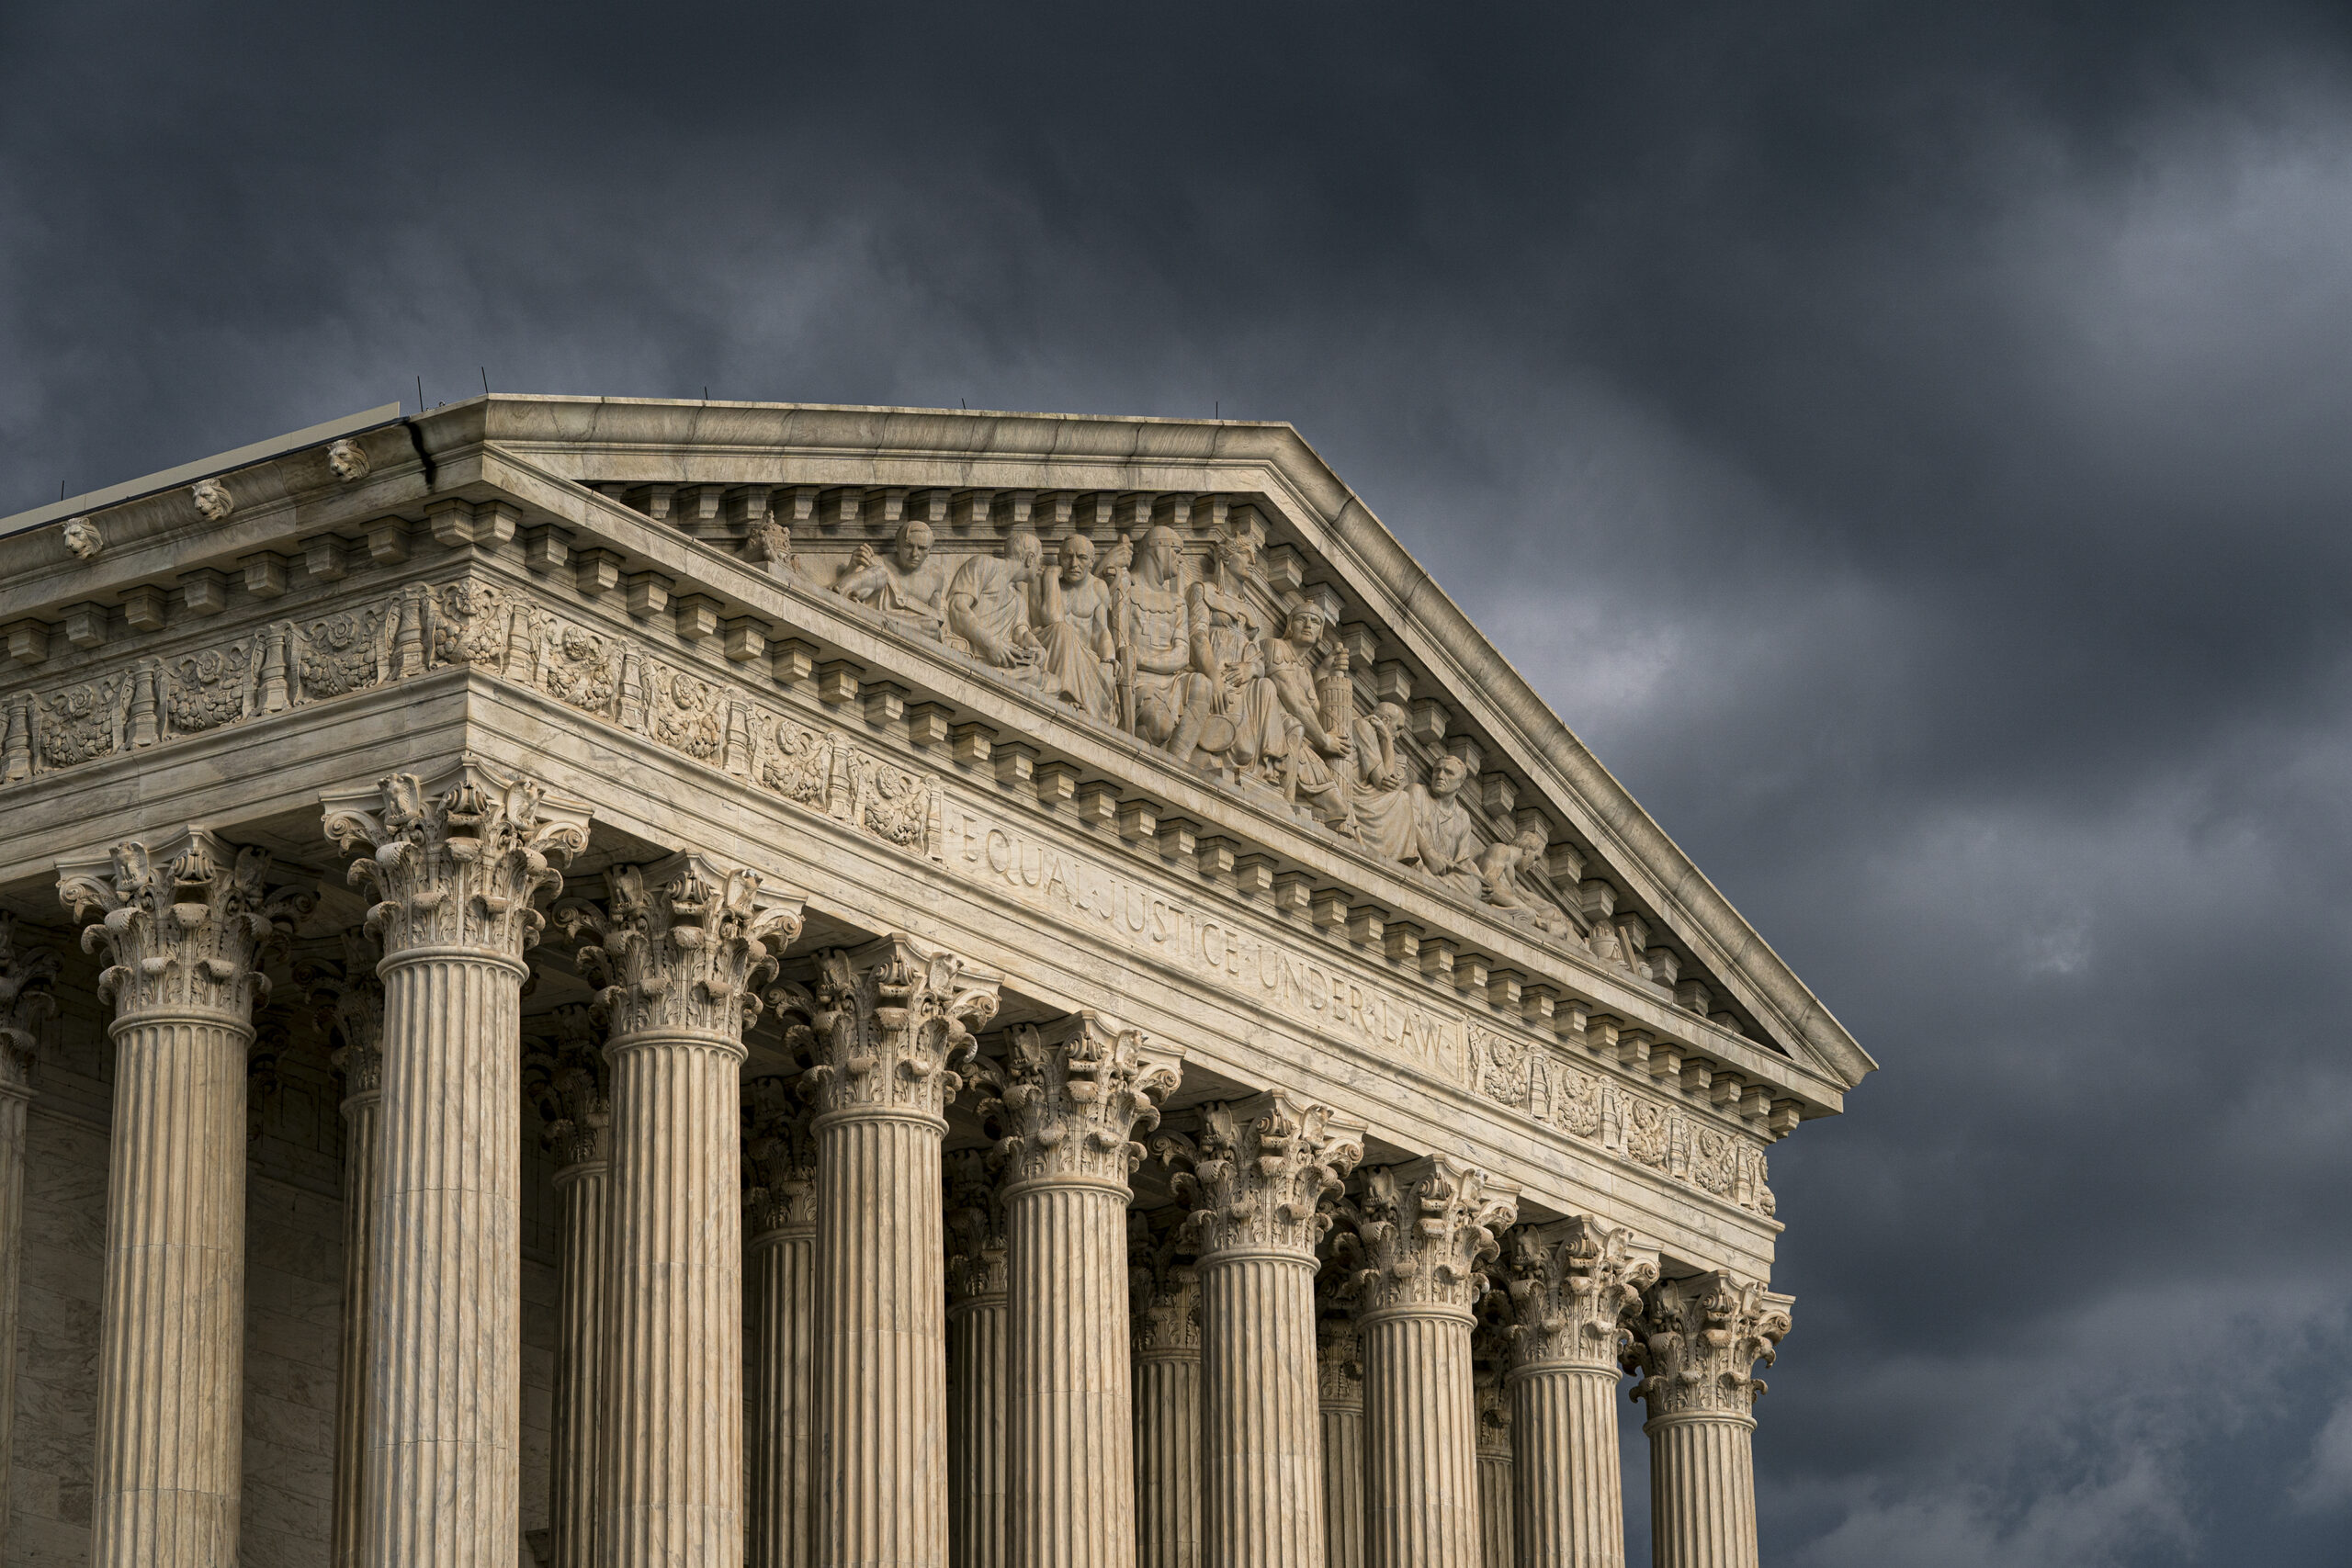 FILE - In this June 20, 2019, file photo, the Supreme Court is seen in Washington as a storm rolls in. The Supreme Court has agreed to hear an appeal to expand gun rights in the United States in a New York case over the right to carry a firearm in public for self-defense. (AP Photo/J. Scott Applewhite, File)